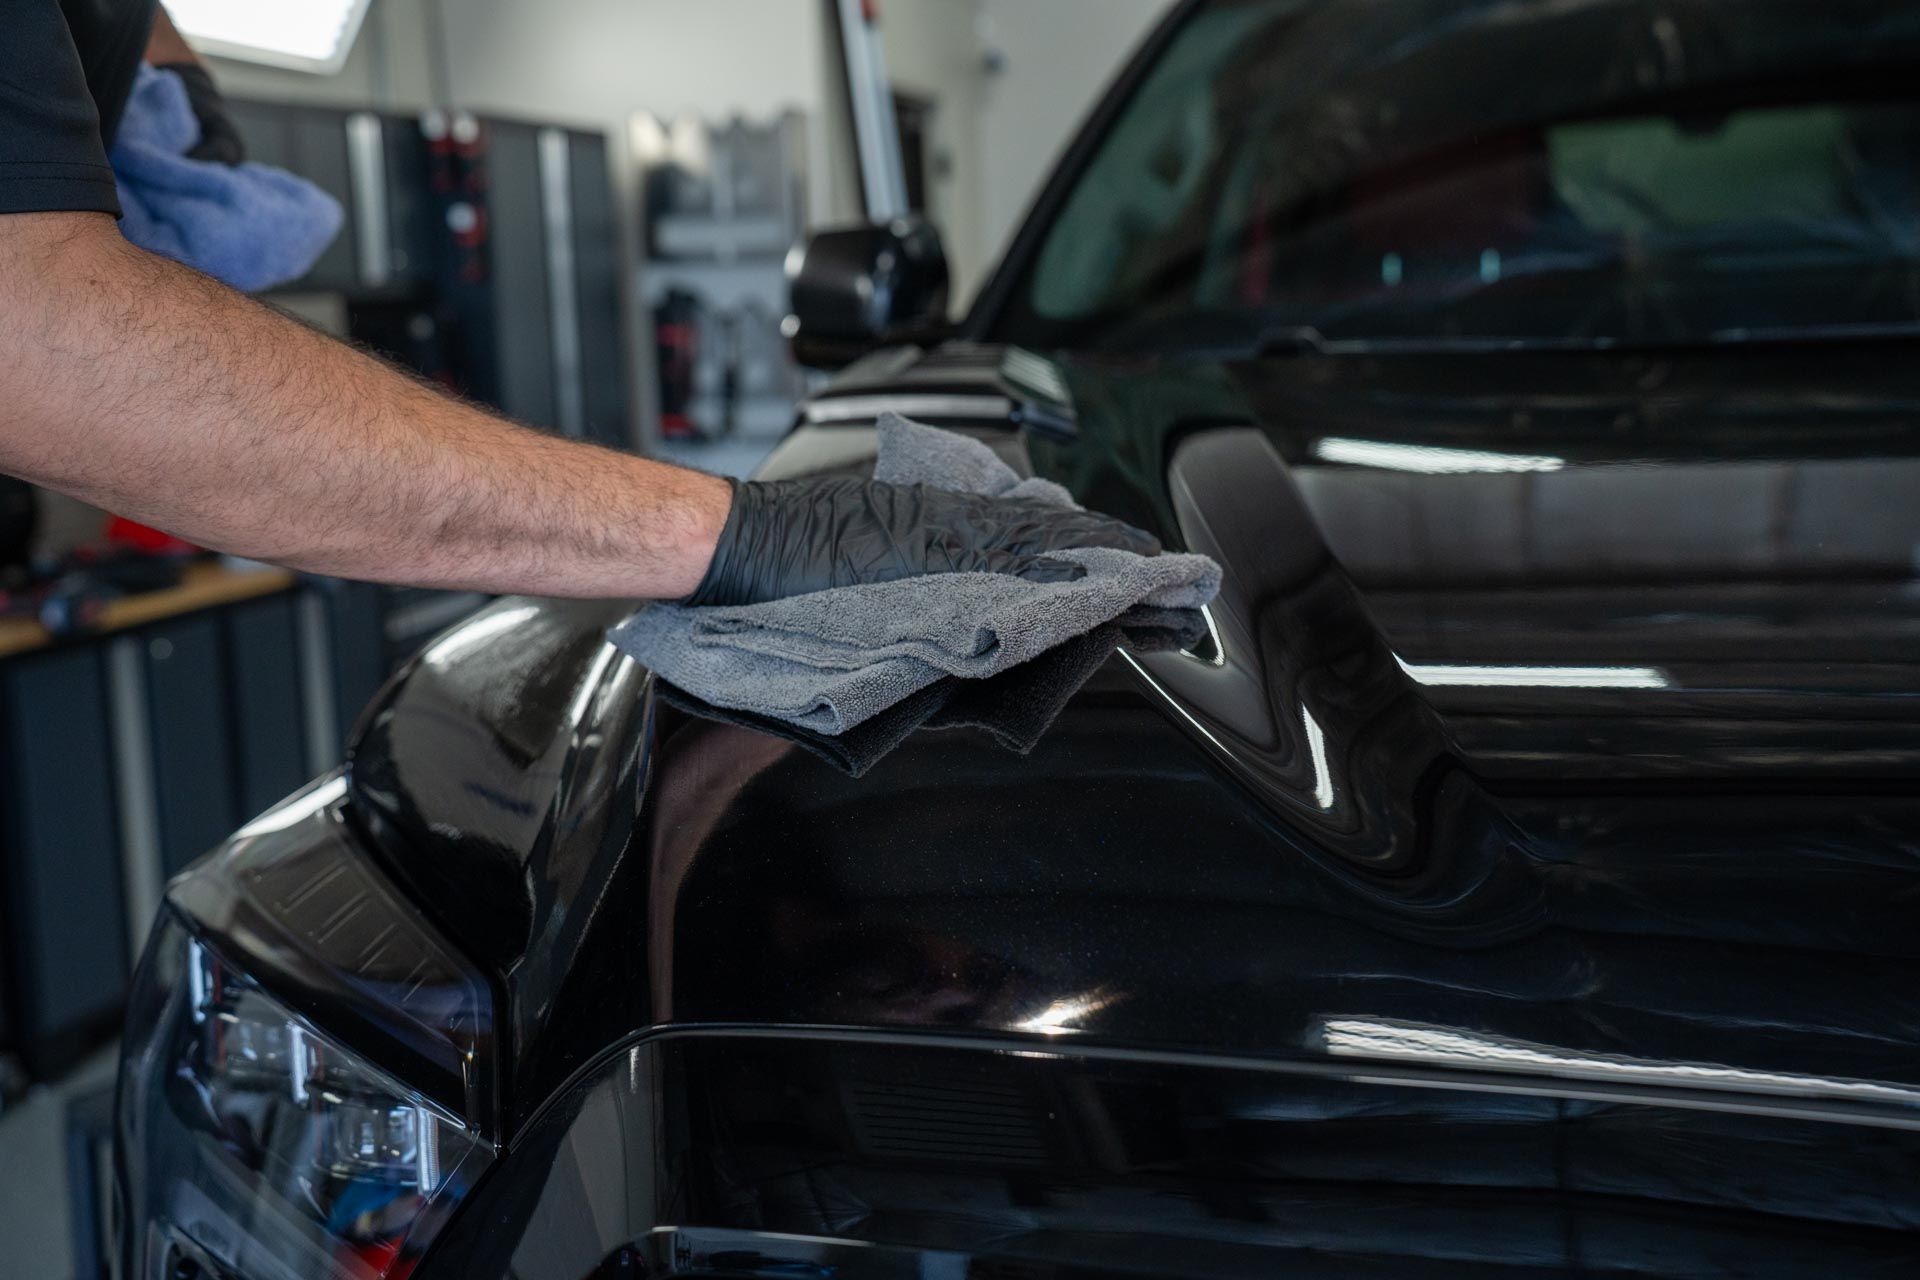 A man is cleaning the hood of a black car with a towel.